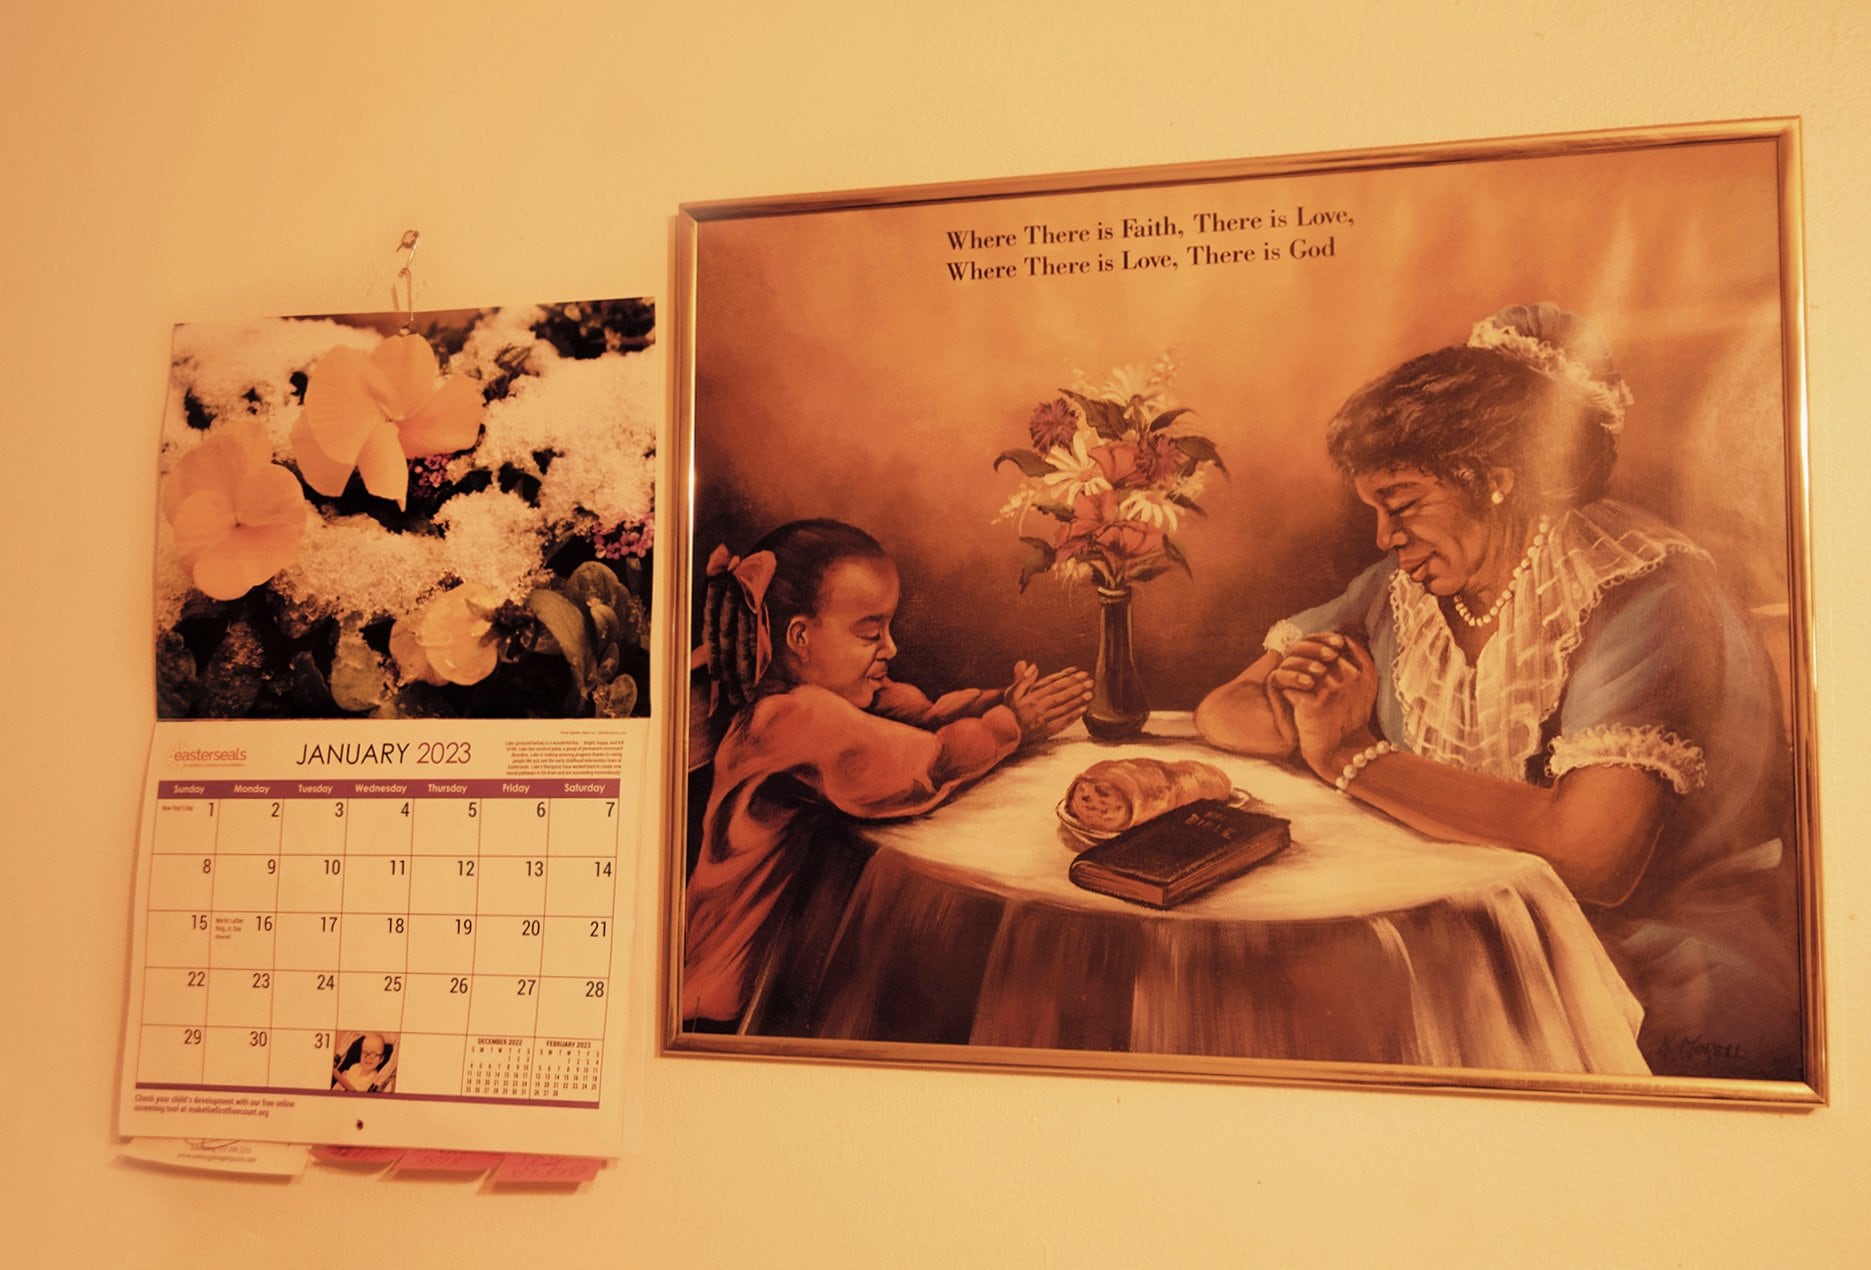 A wall calendar and a picture with a prayer,